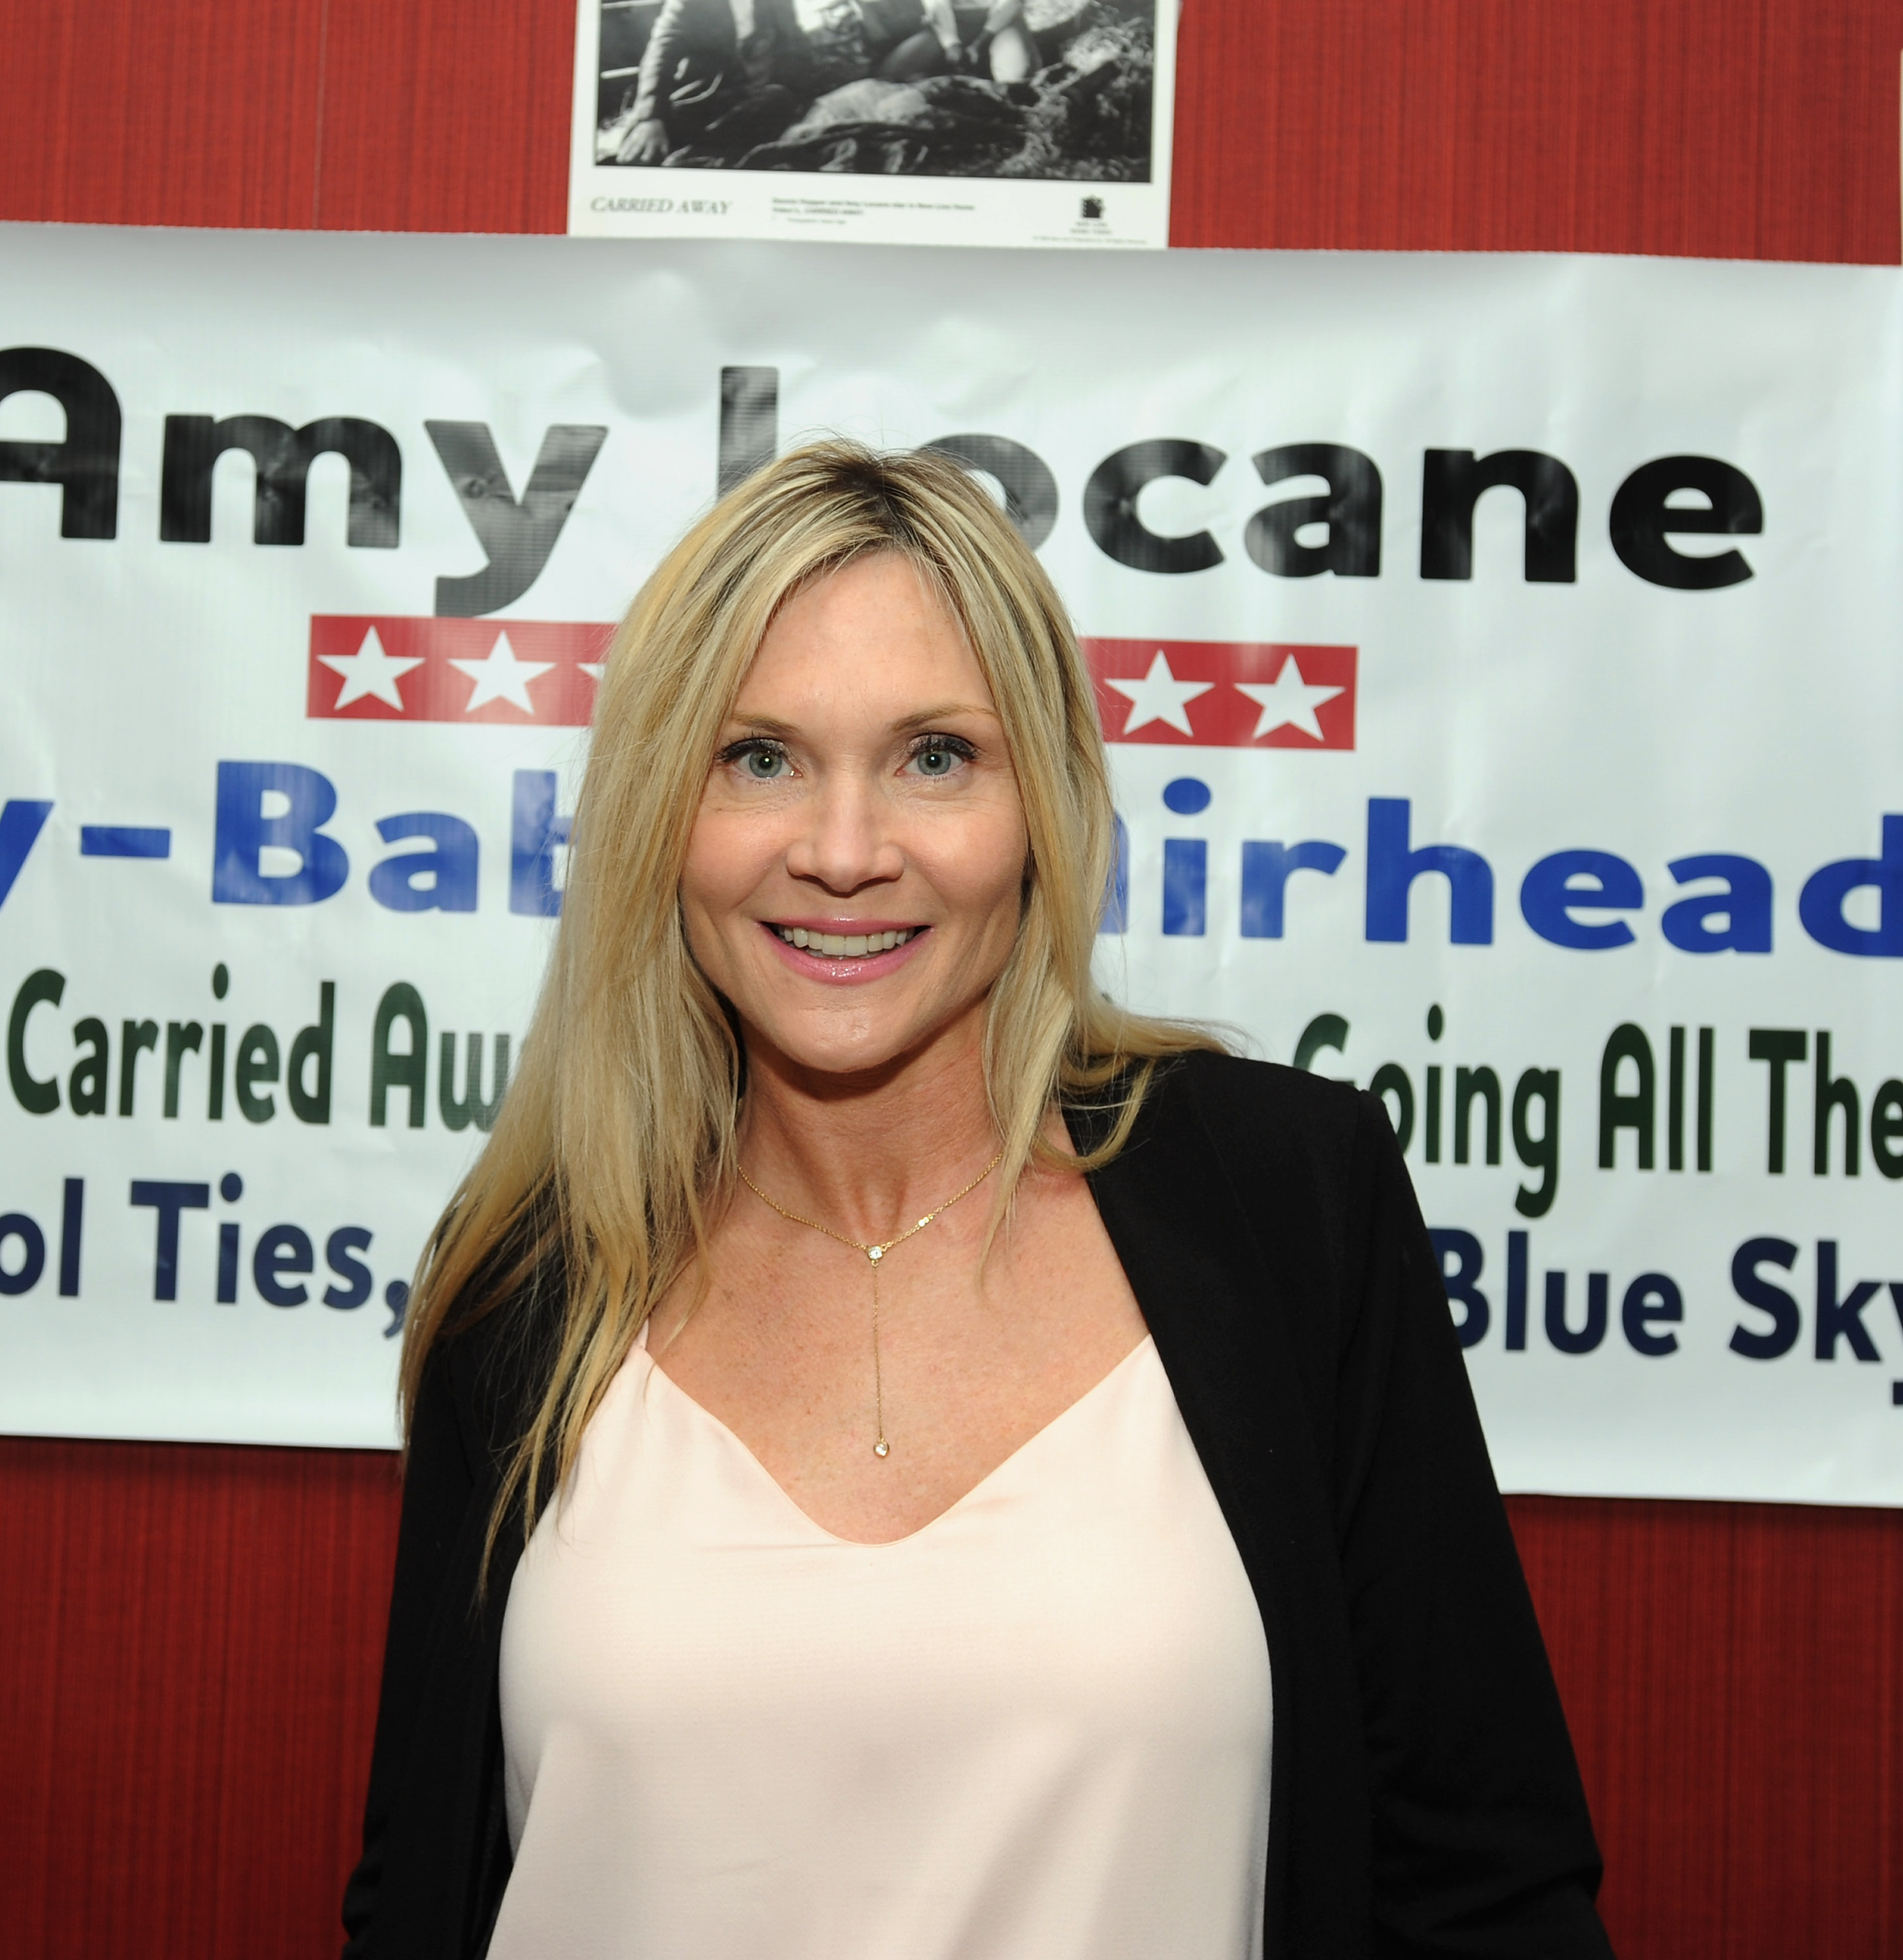 Amy Locane at Renaissance Woodbridge Hotel on March 2, 2018 in Iselin, New Jersey.